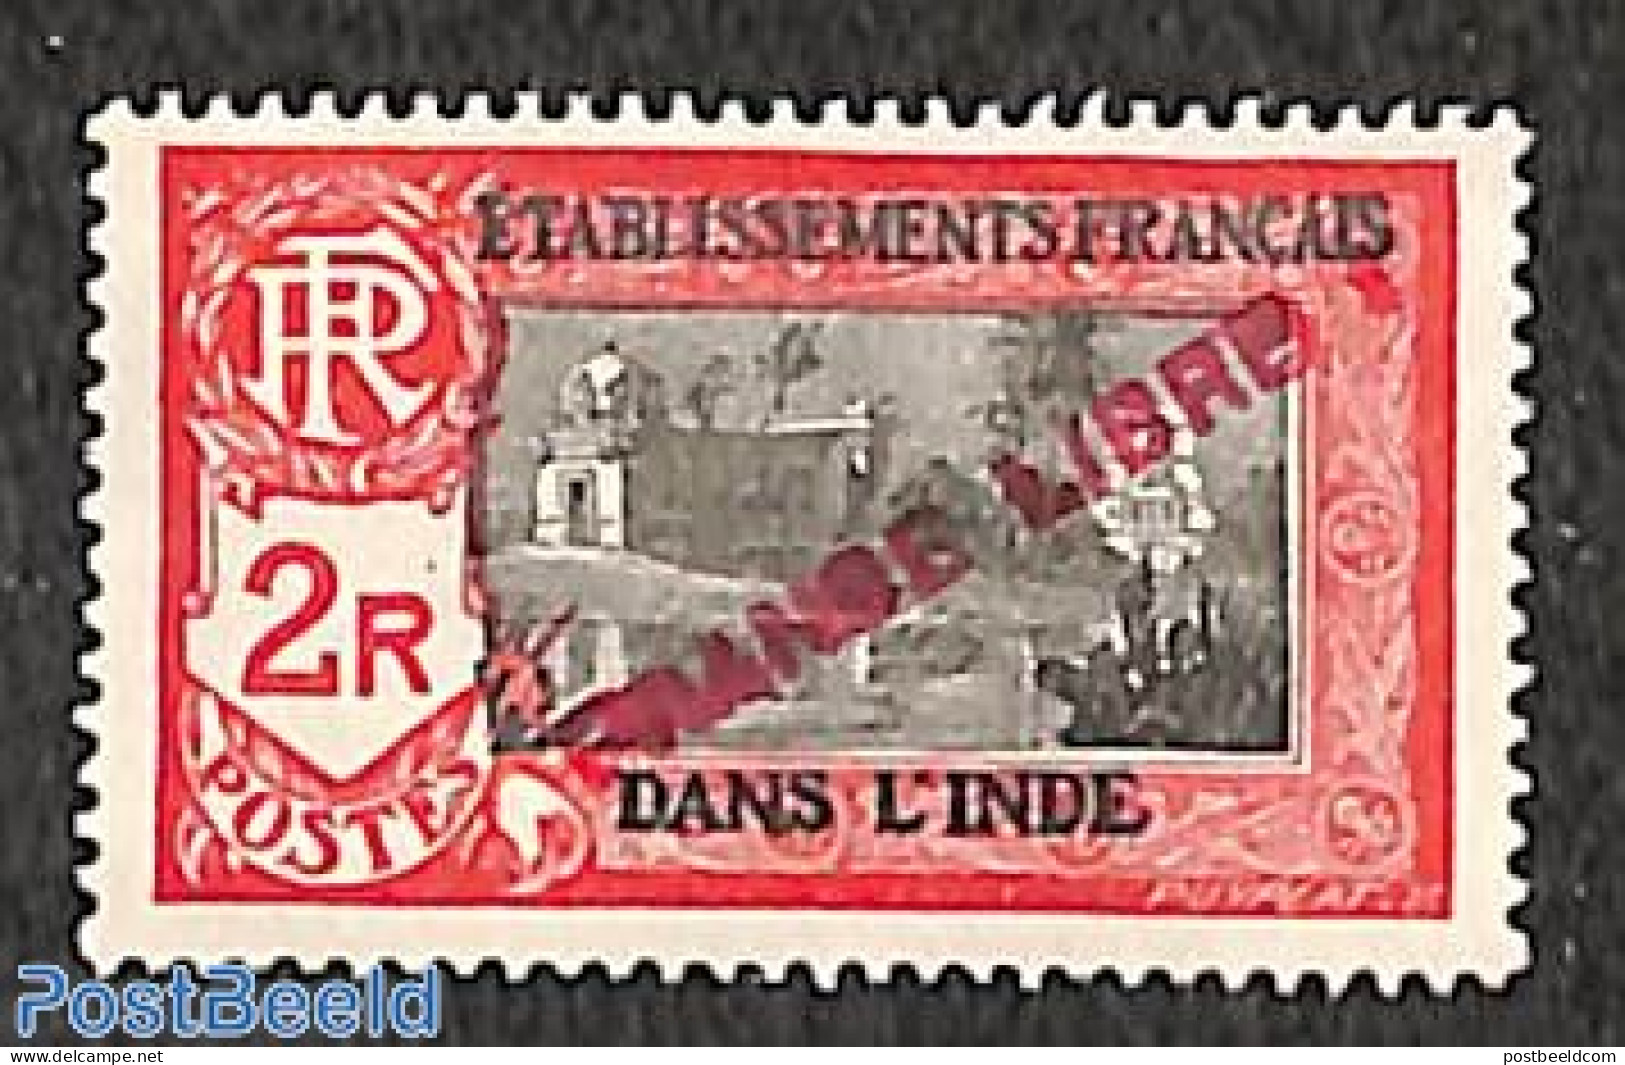 French India 1941 2R, FRANCE LIBRE, Stamp Out Of Set, Mint NH - Neufs